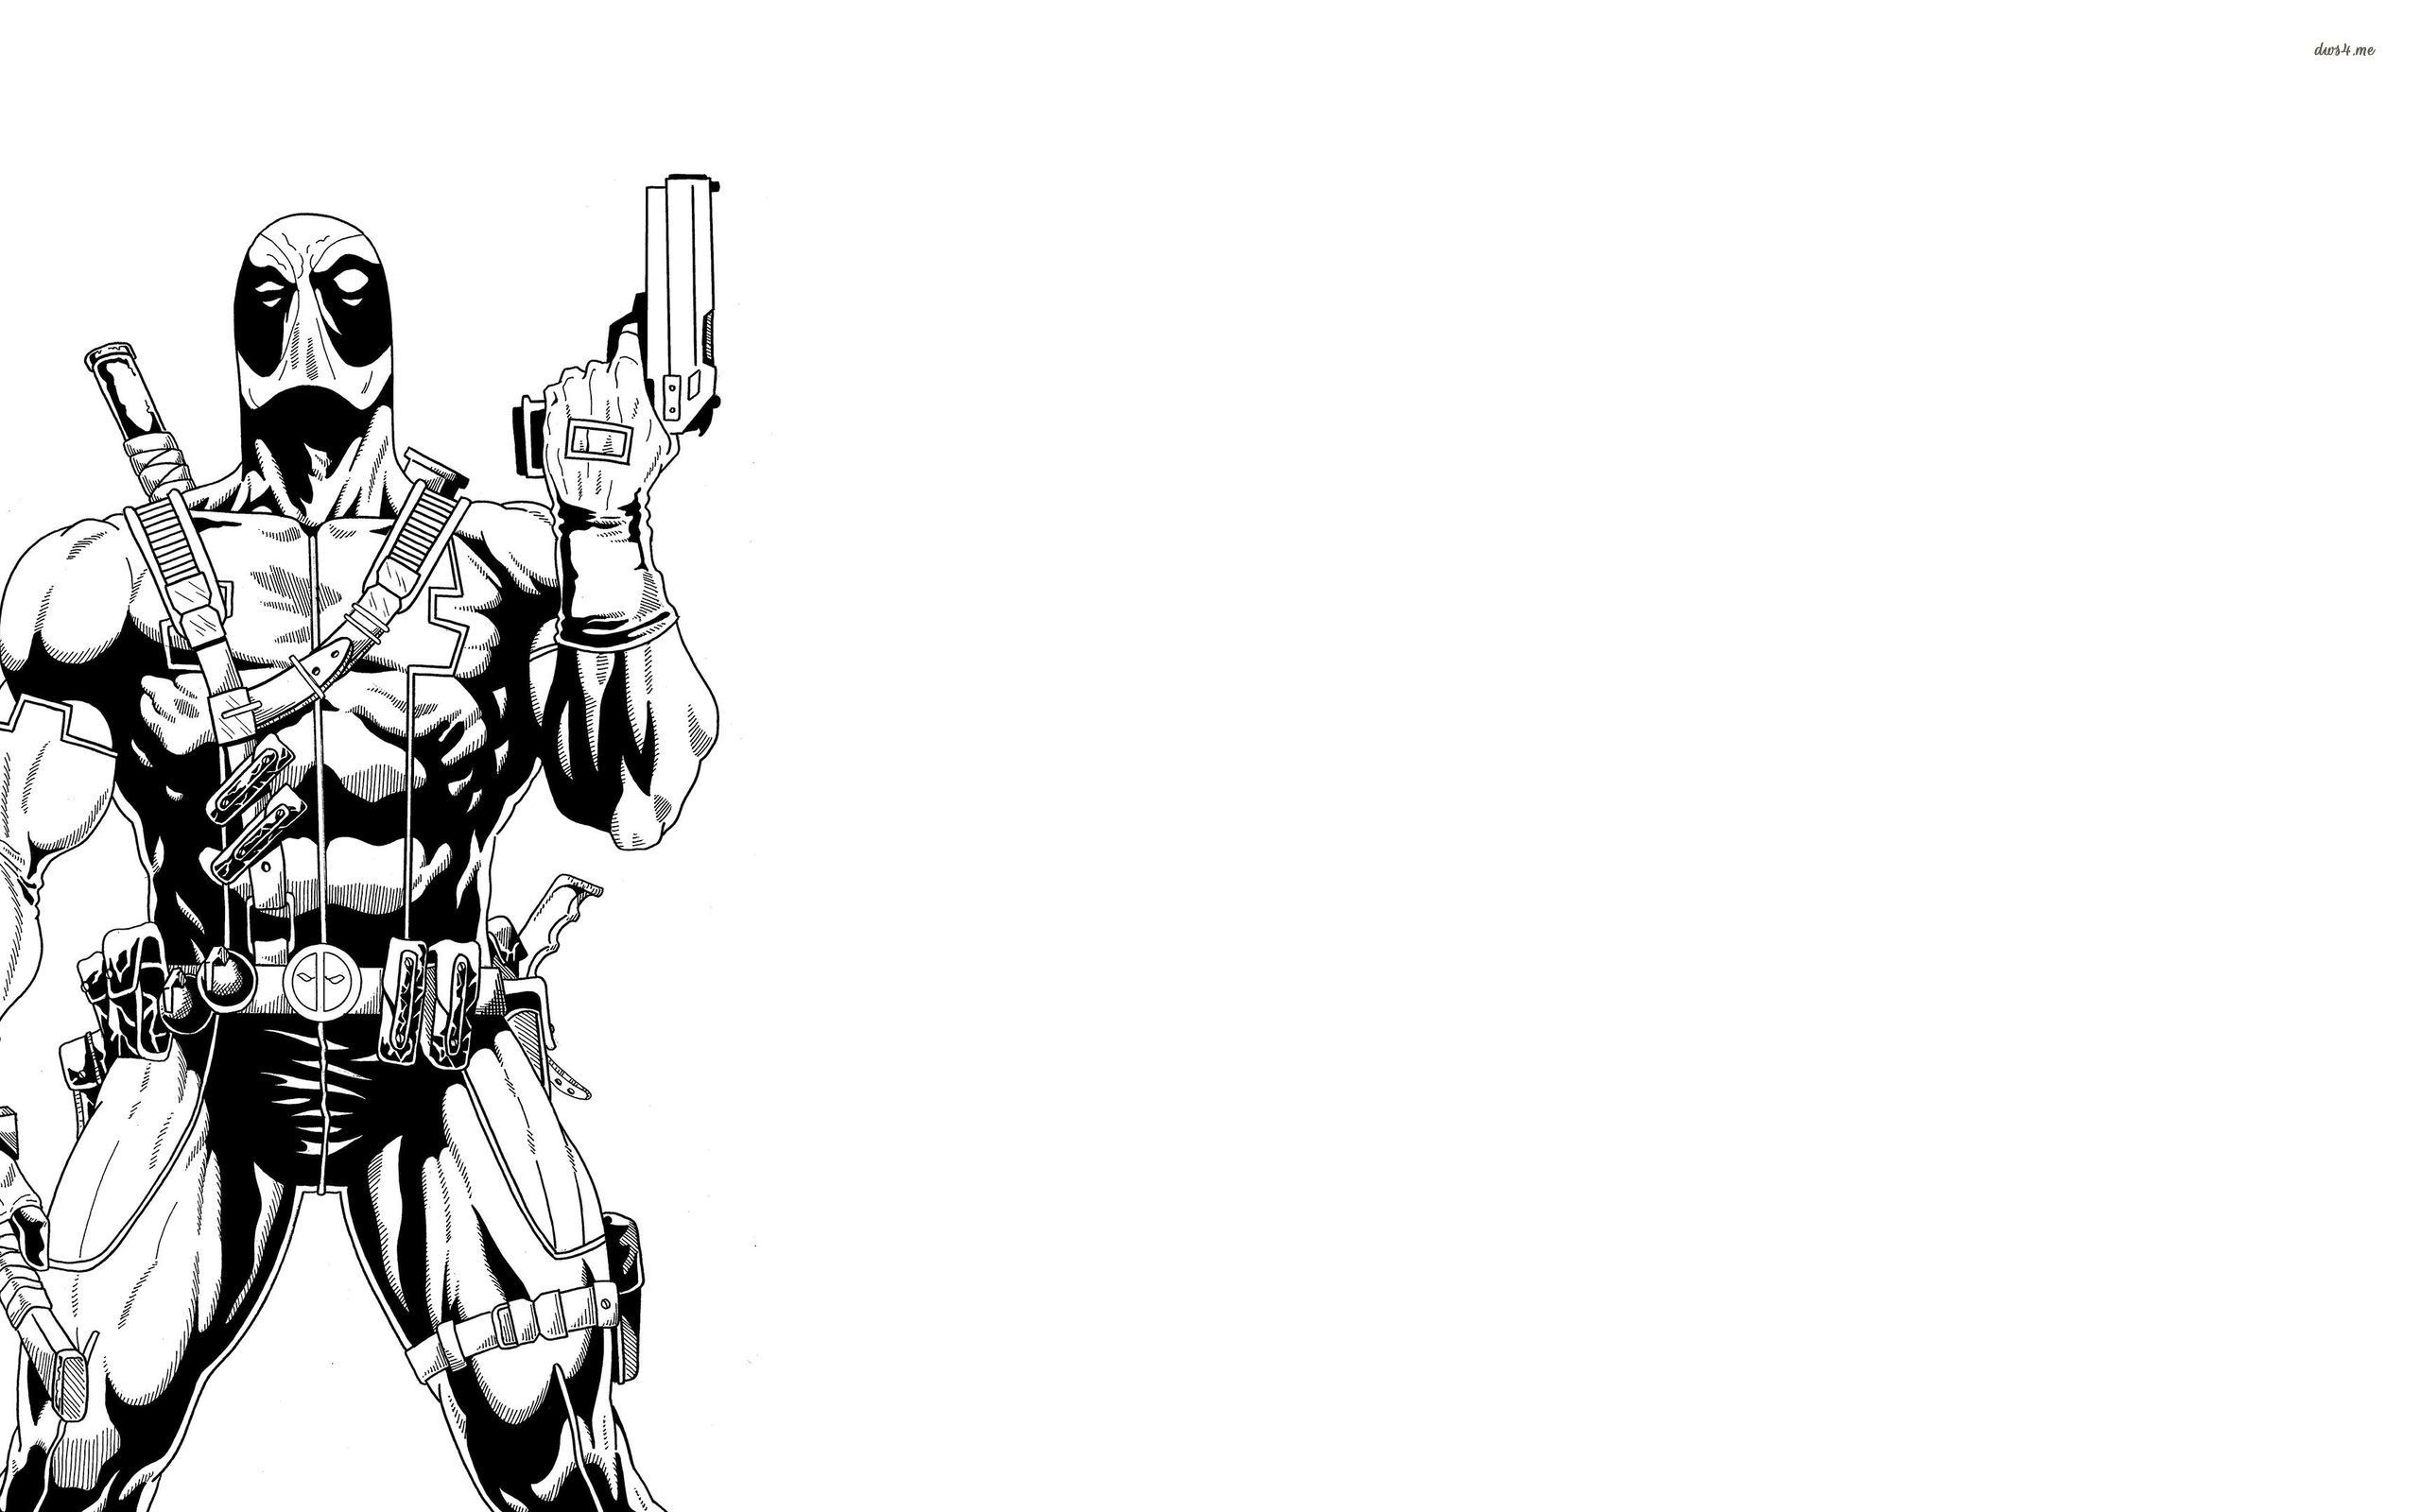 Black and white Deadpool wallpaper - Comic wallpapers - #45138